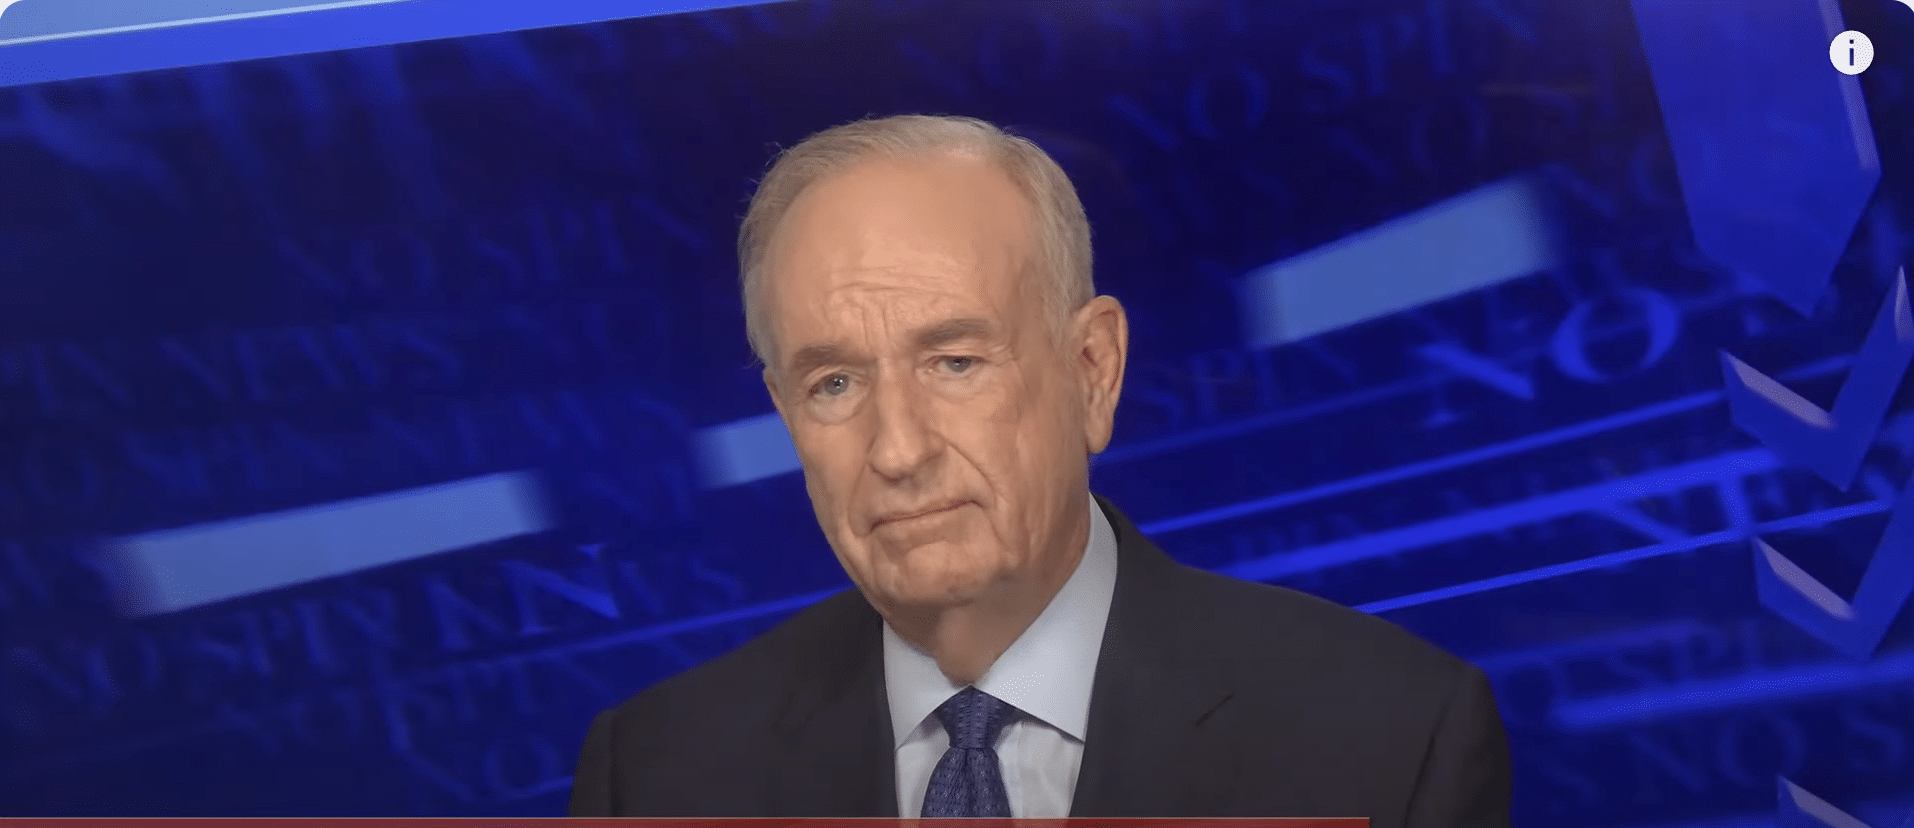 Bill O’Reilly claims to have seen email screenshots saying Biden is getting replaced